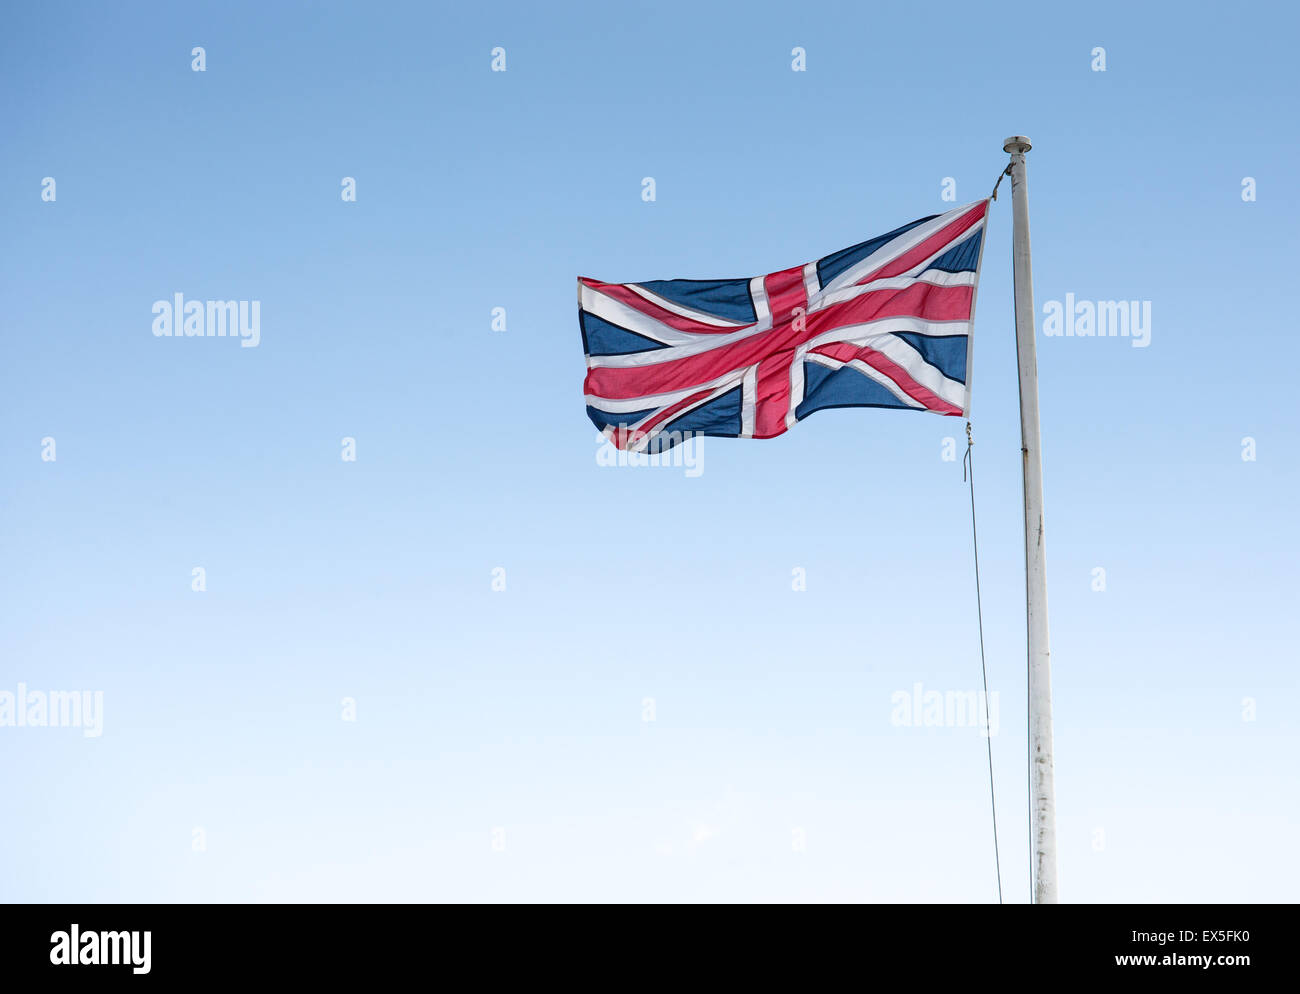 Union jack flag billowing against a dramatic sky Stock Photo